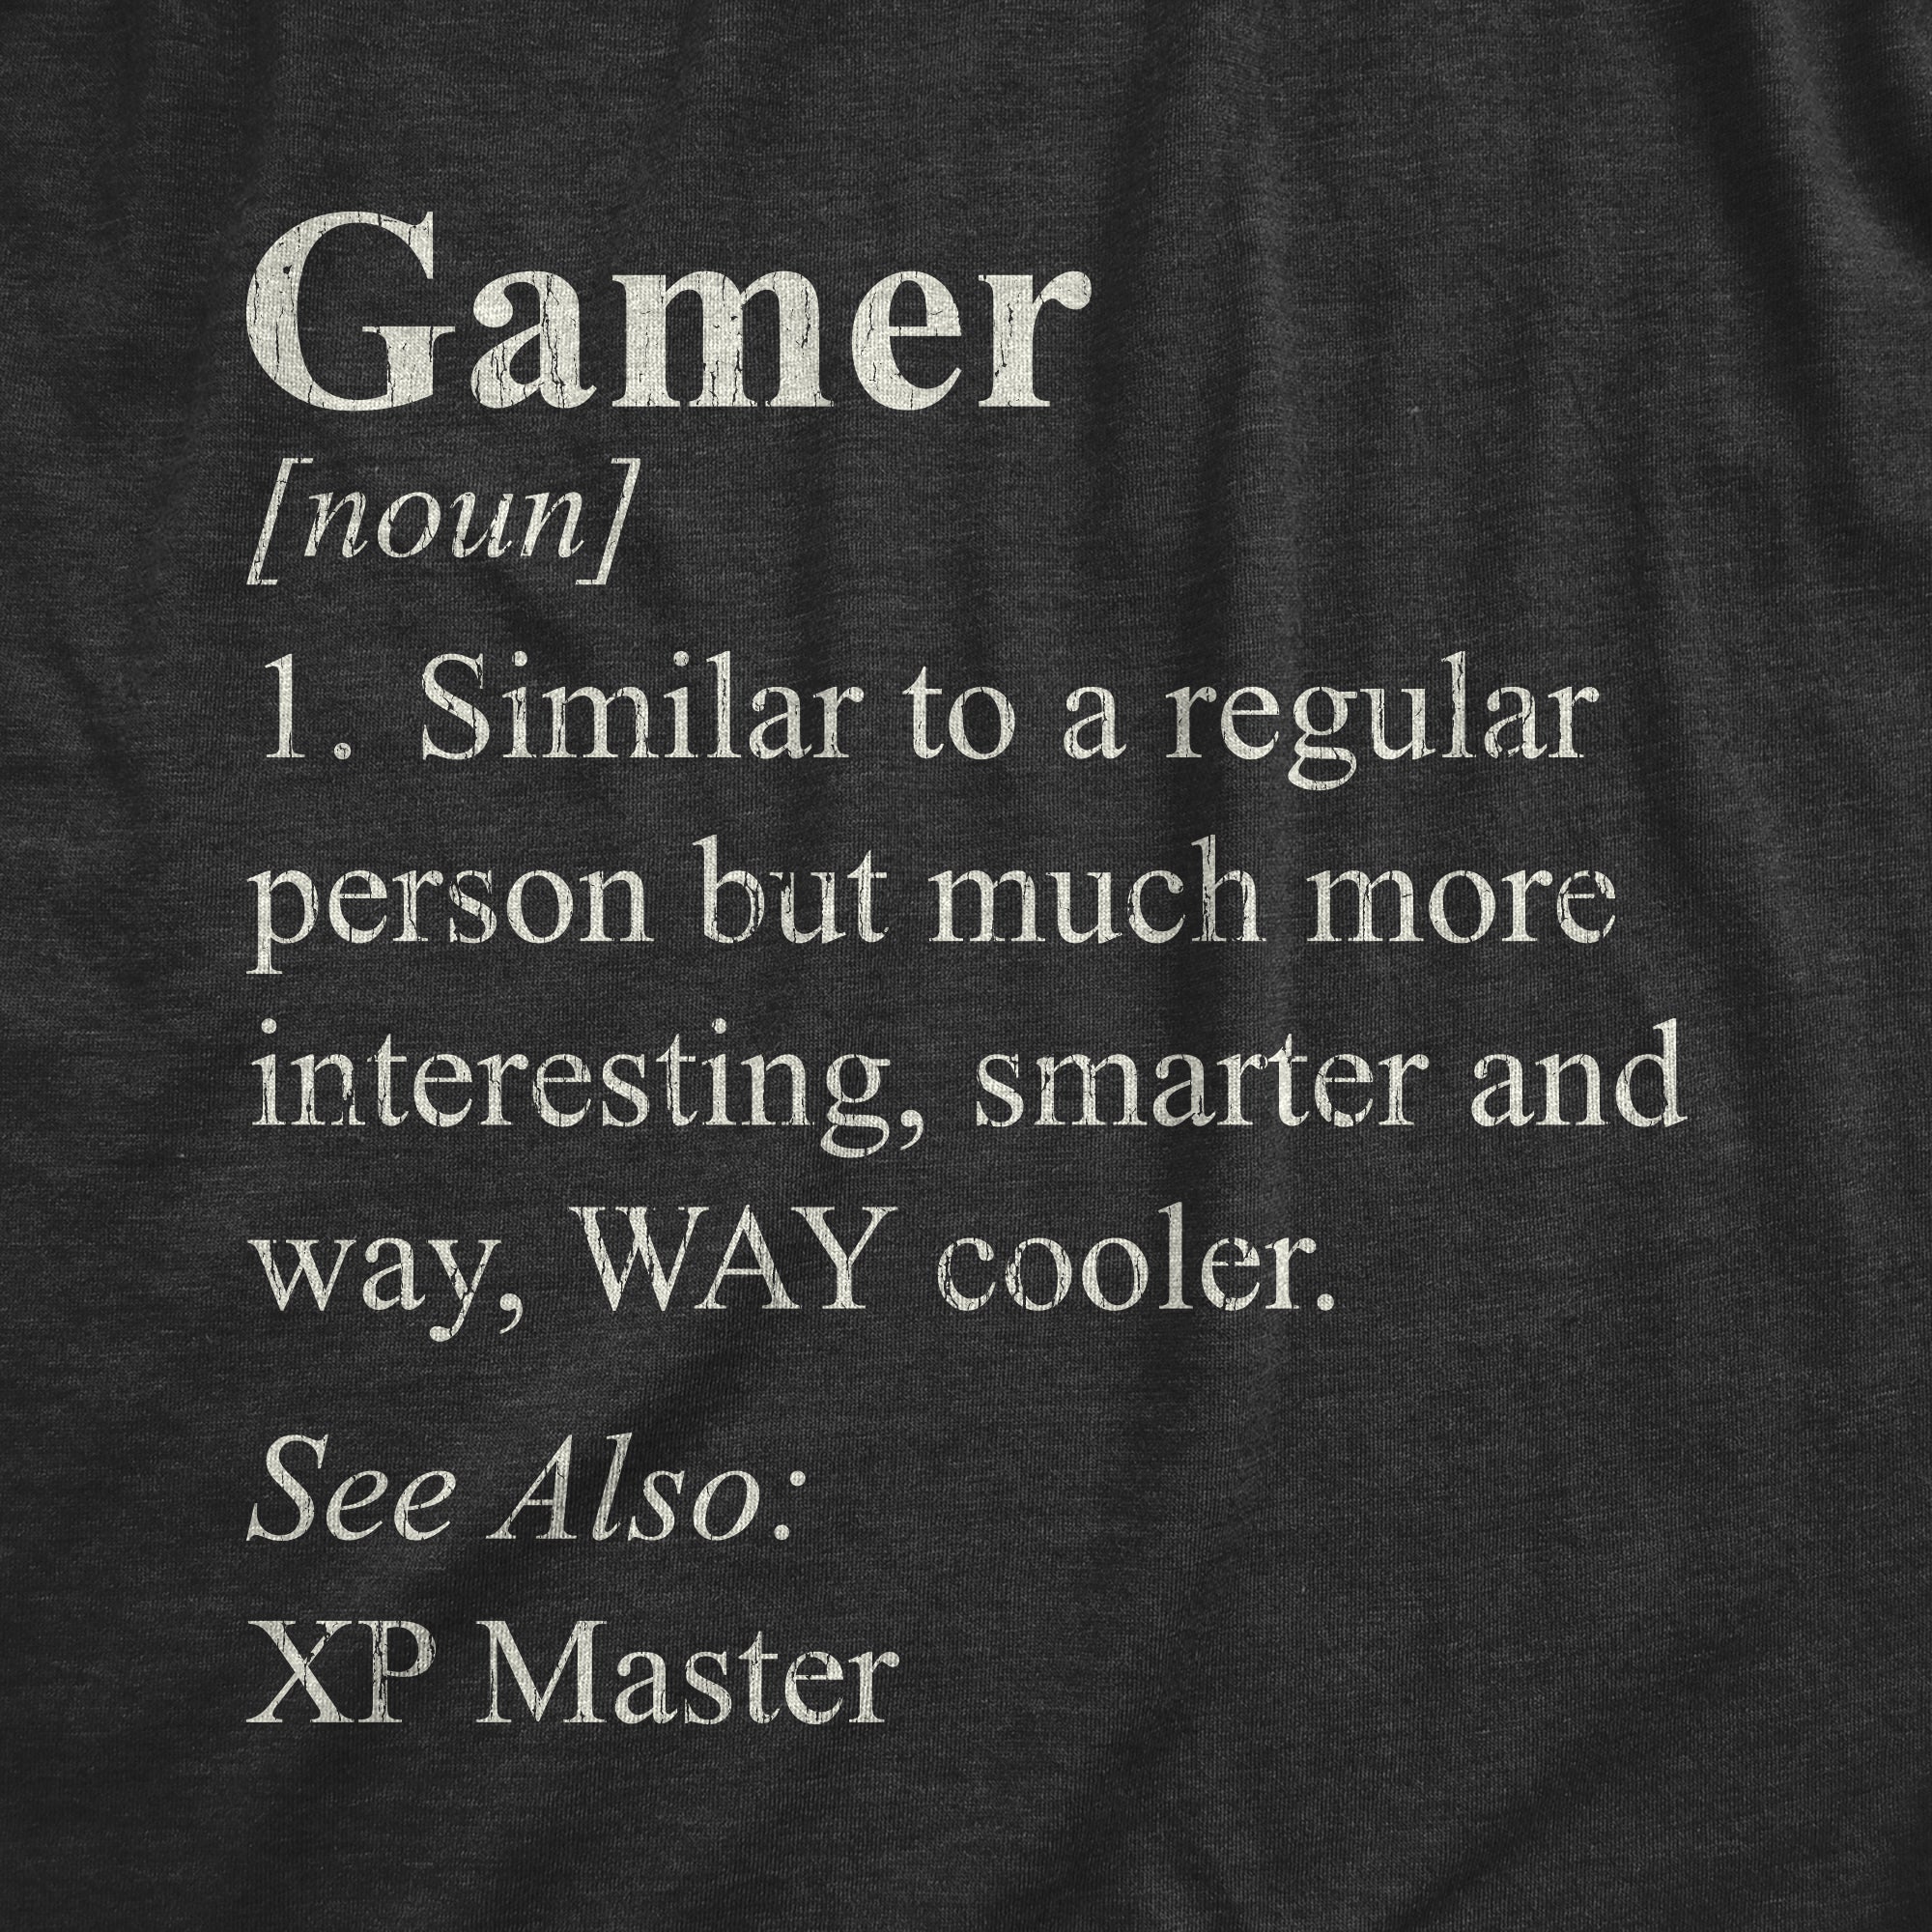 Funny Heather Black - GAMER Gamer Definition Mens T Shirt Nerdy Video Games Sarcastic Tee